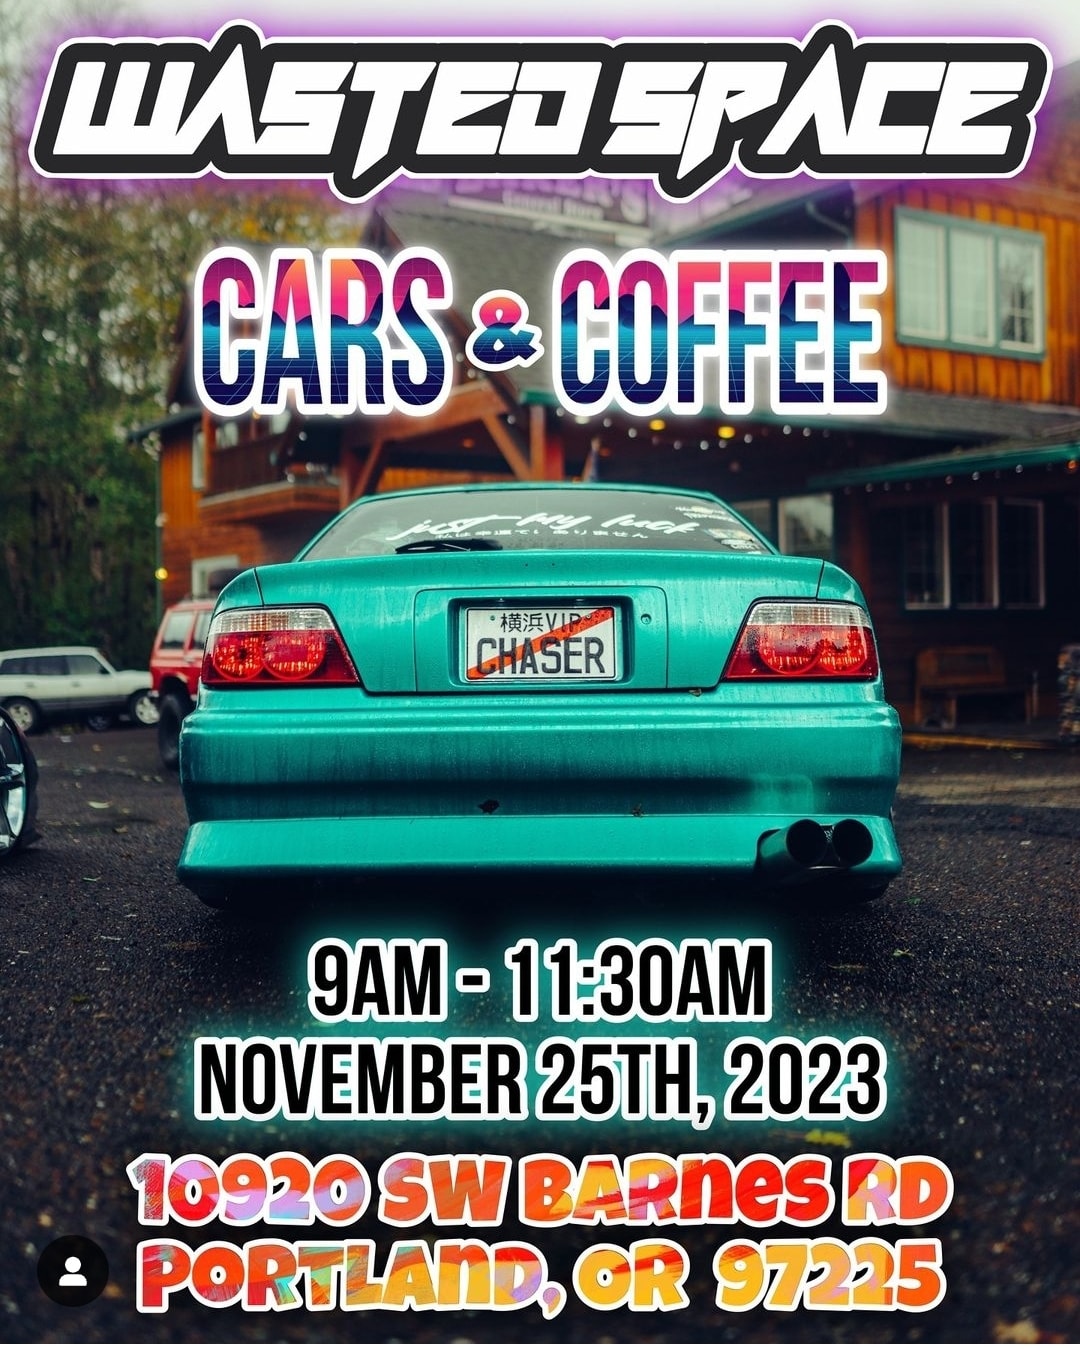 Wasted Space Cars & Coffee